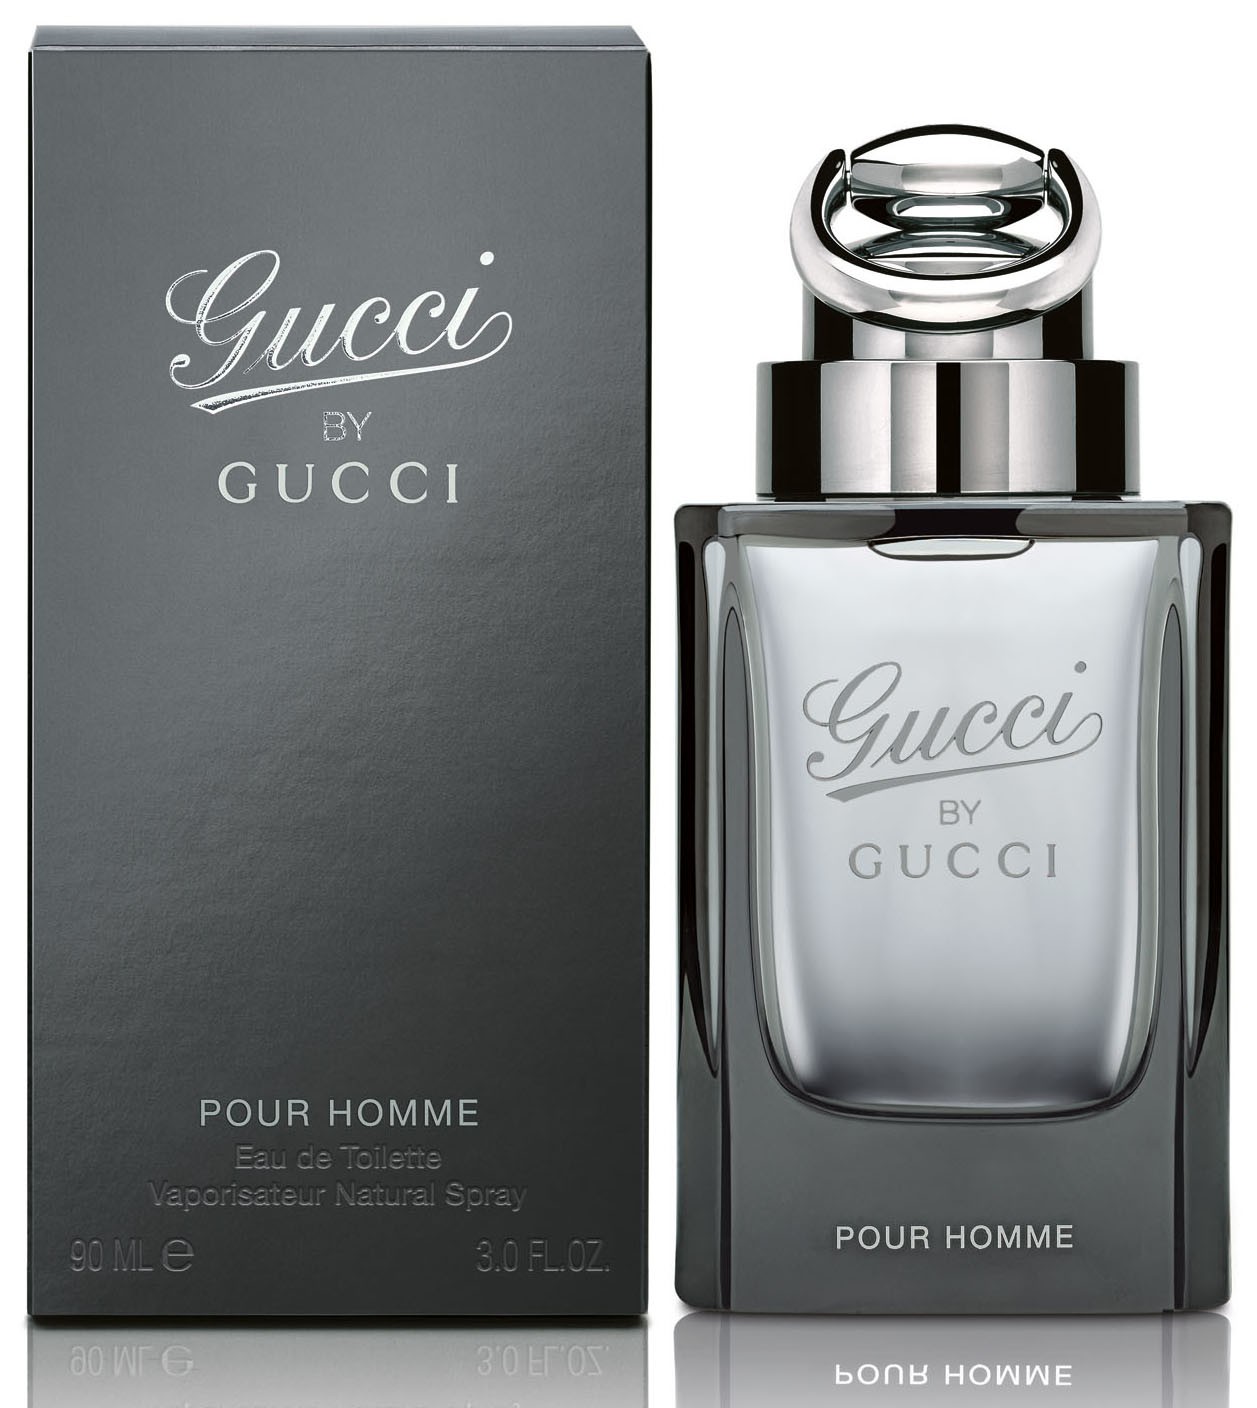 Мужские каталоги парфюмерии. Gucci by Gucci pour homme EDT, 90 ml. Gucci by Gucci pour homme 90 мл. Gucci by Gucci pour homme 90ml. Туалетная вода Gucci Gucci by Gucci pour homme.